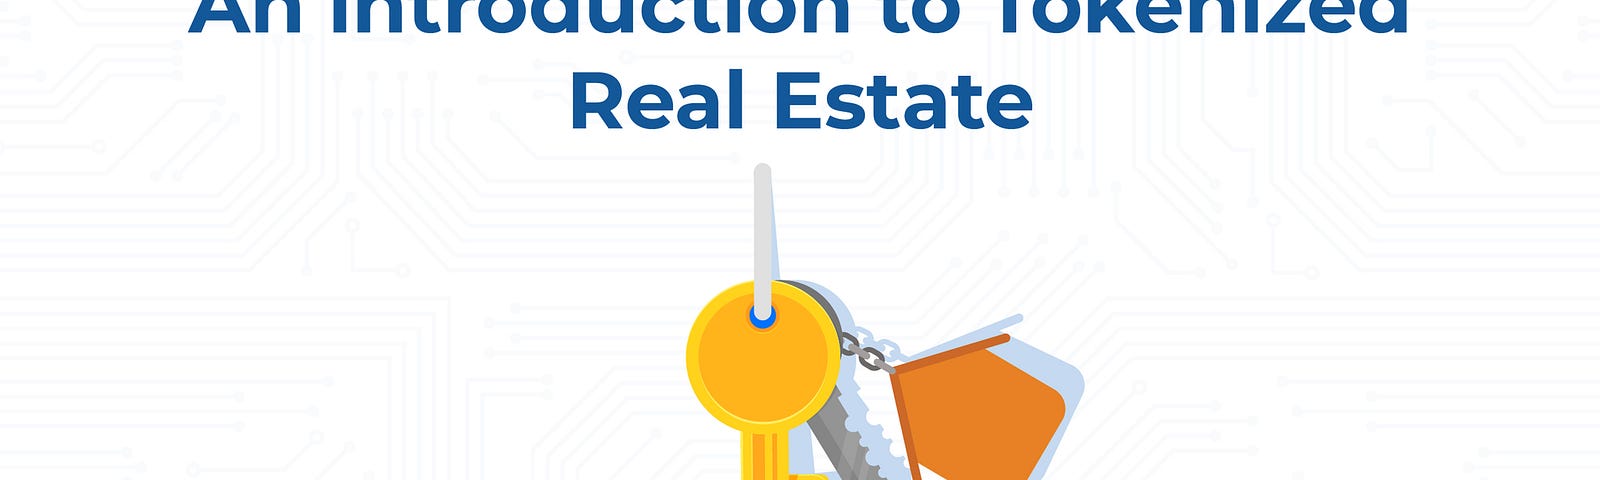 An Introduction to Tokenized Real Estate